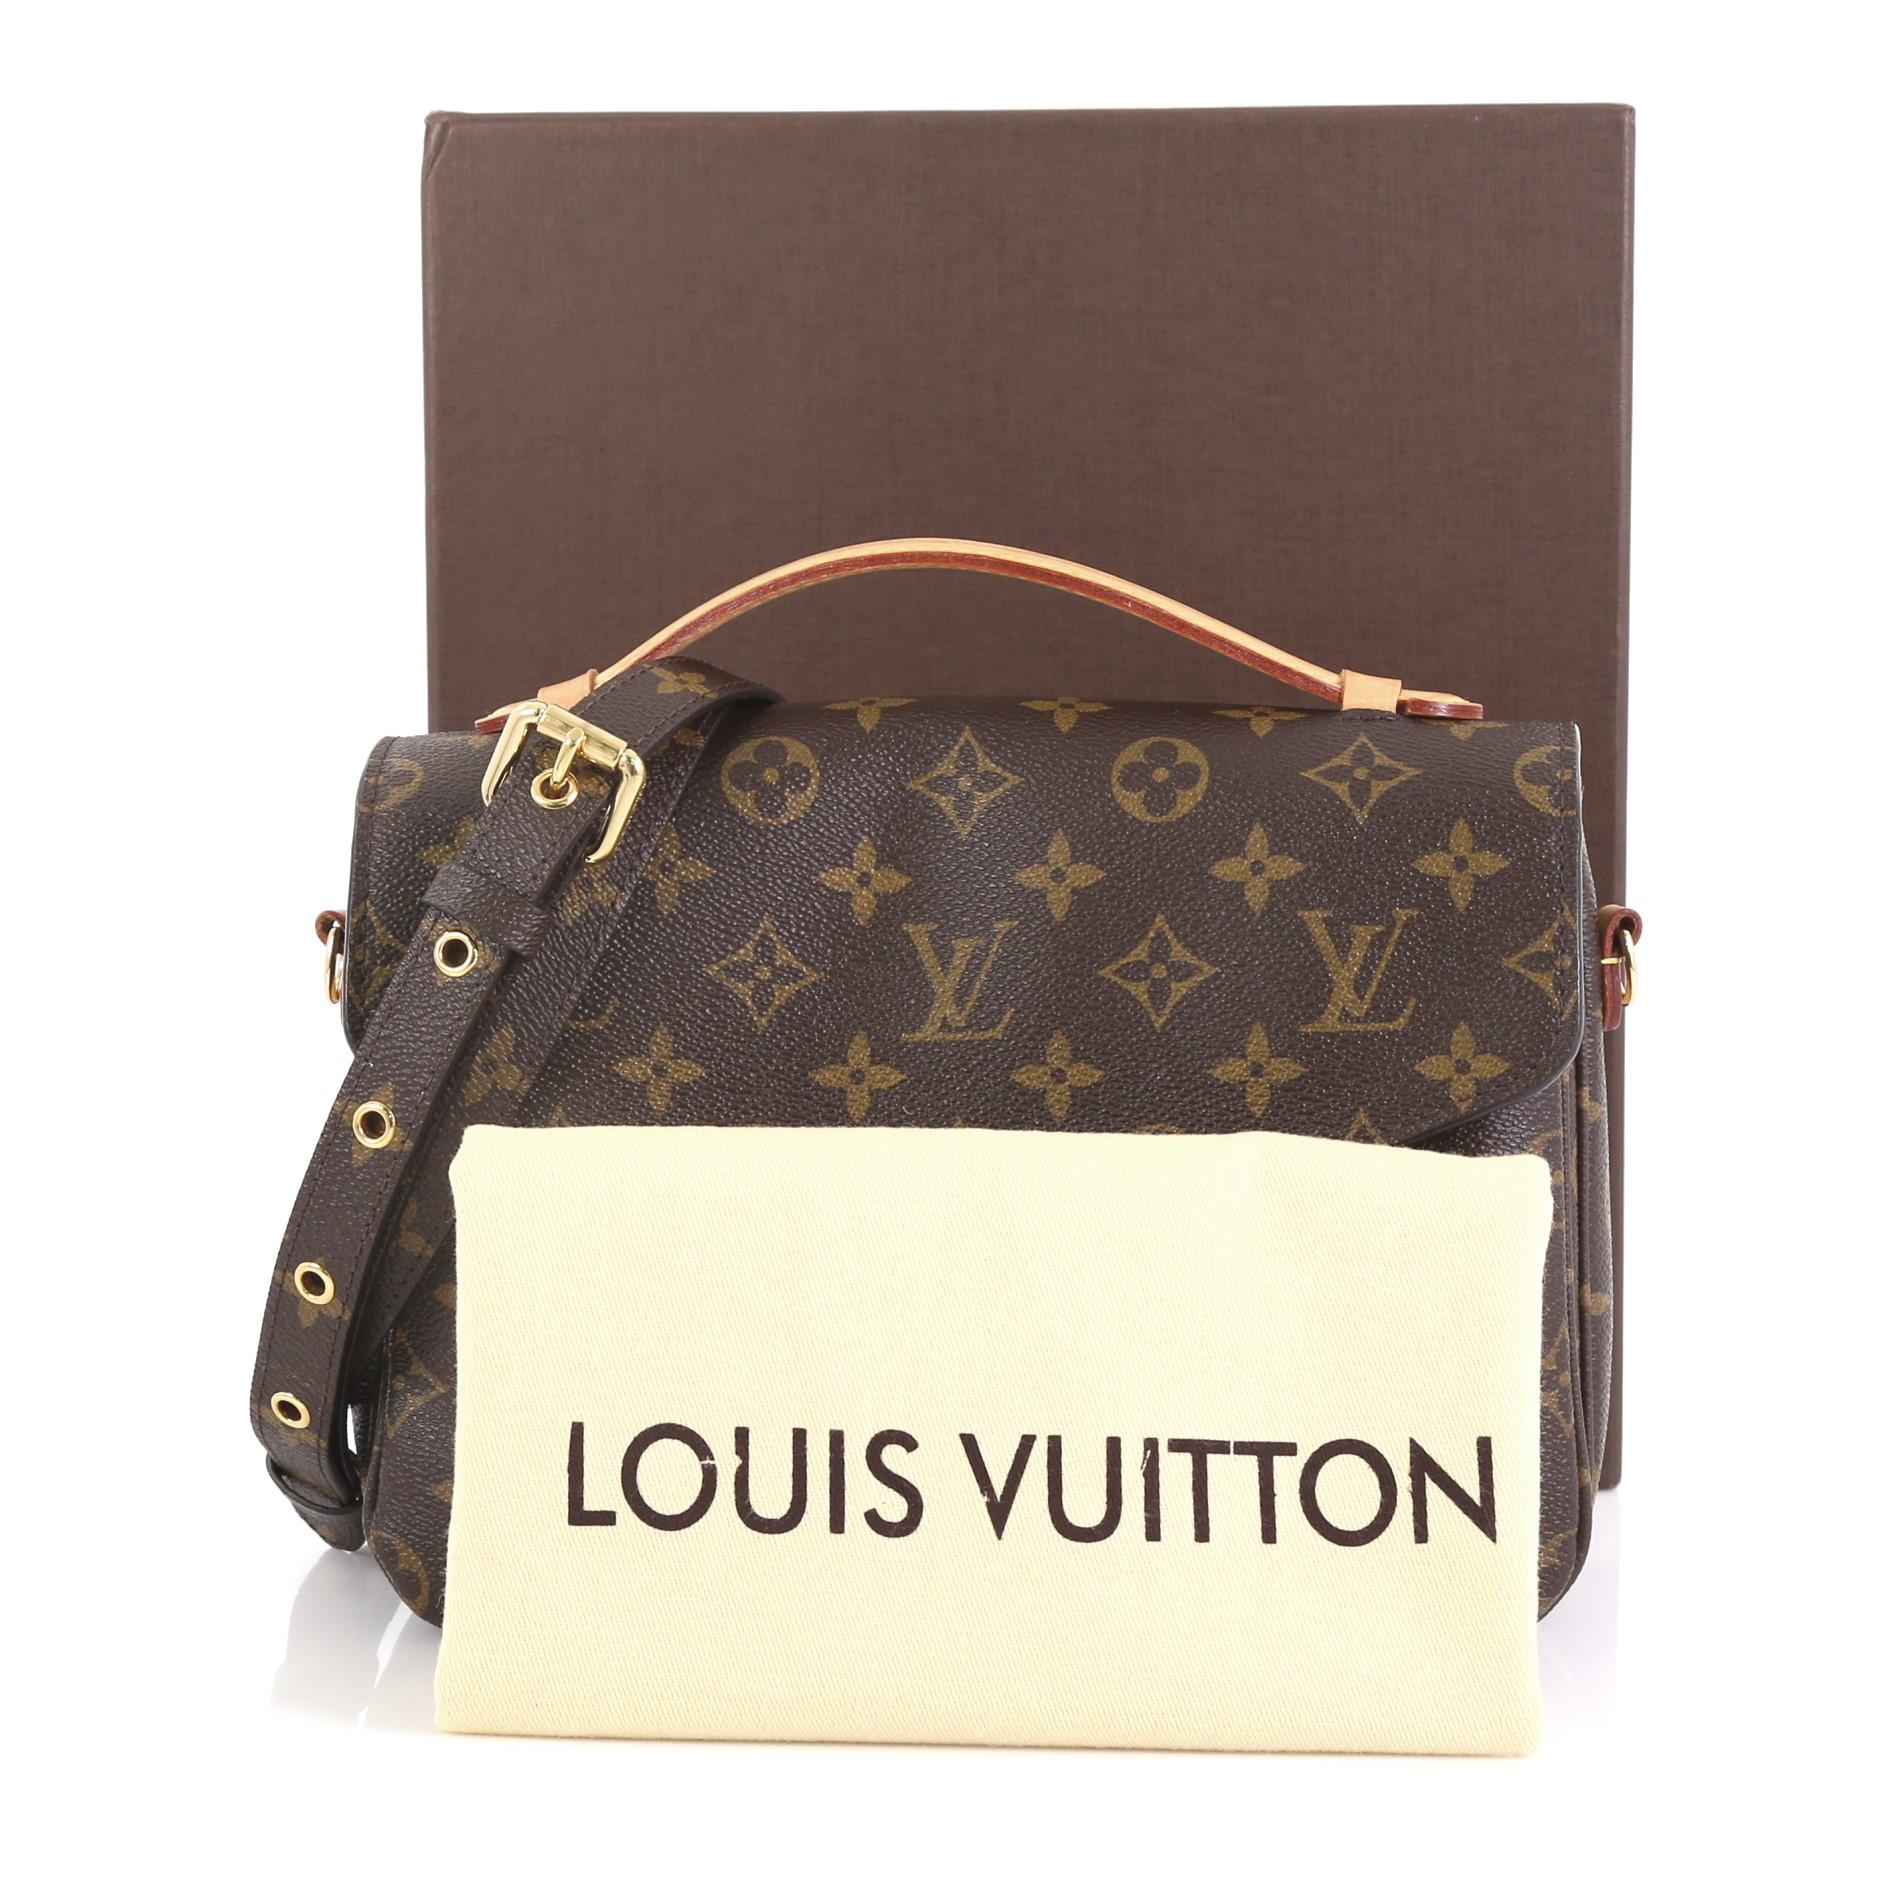 This Louis Vuitton Pochette Metis Monogram Canvas, crafted from brown monogram coated canvas, features a top leather handle, exterior back zip pocket, and gold-tone hardware. Its S-lock closure opens to a brown microfiber interior divided into three